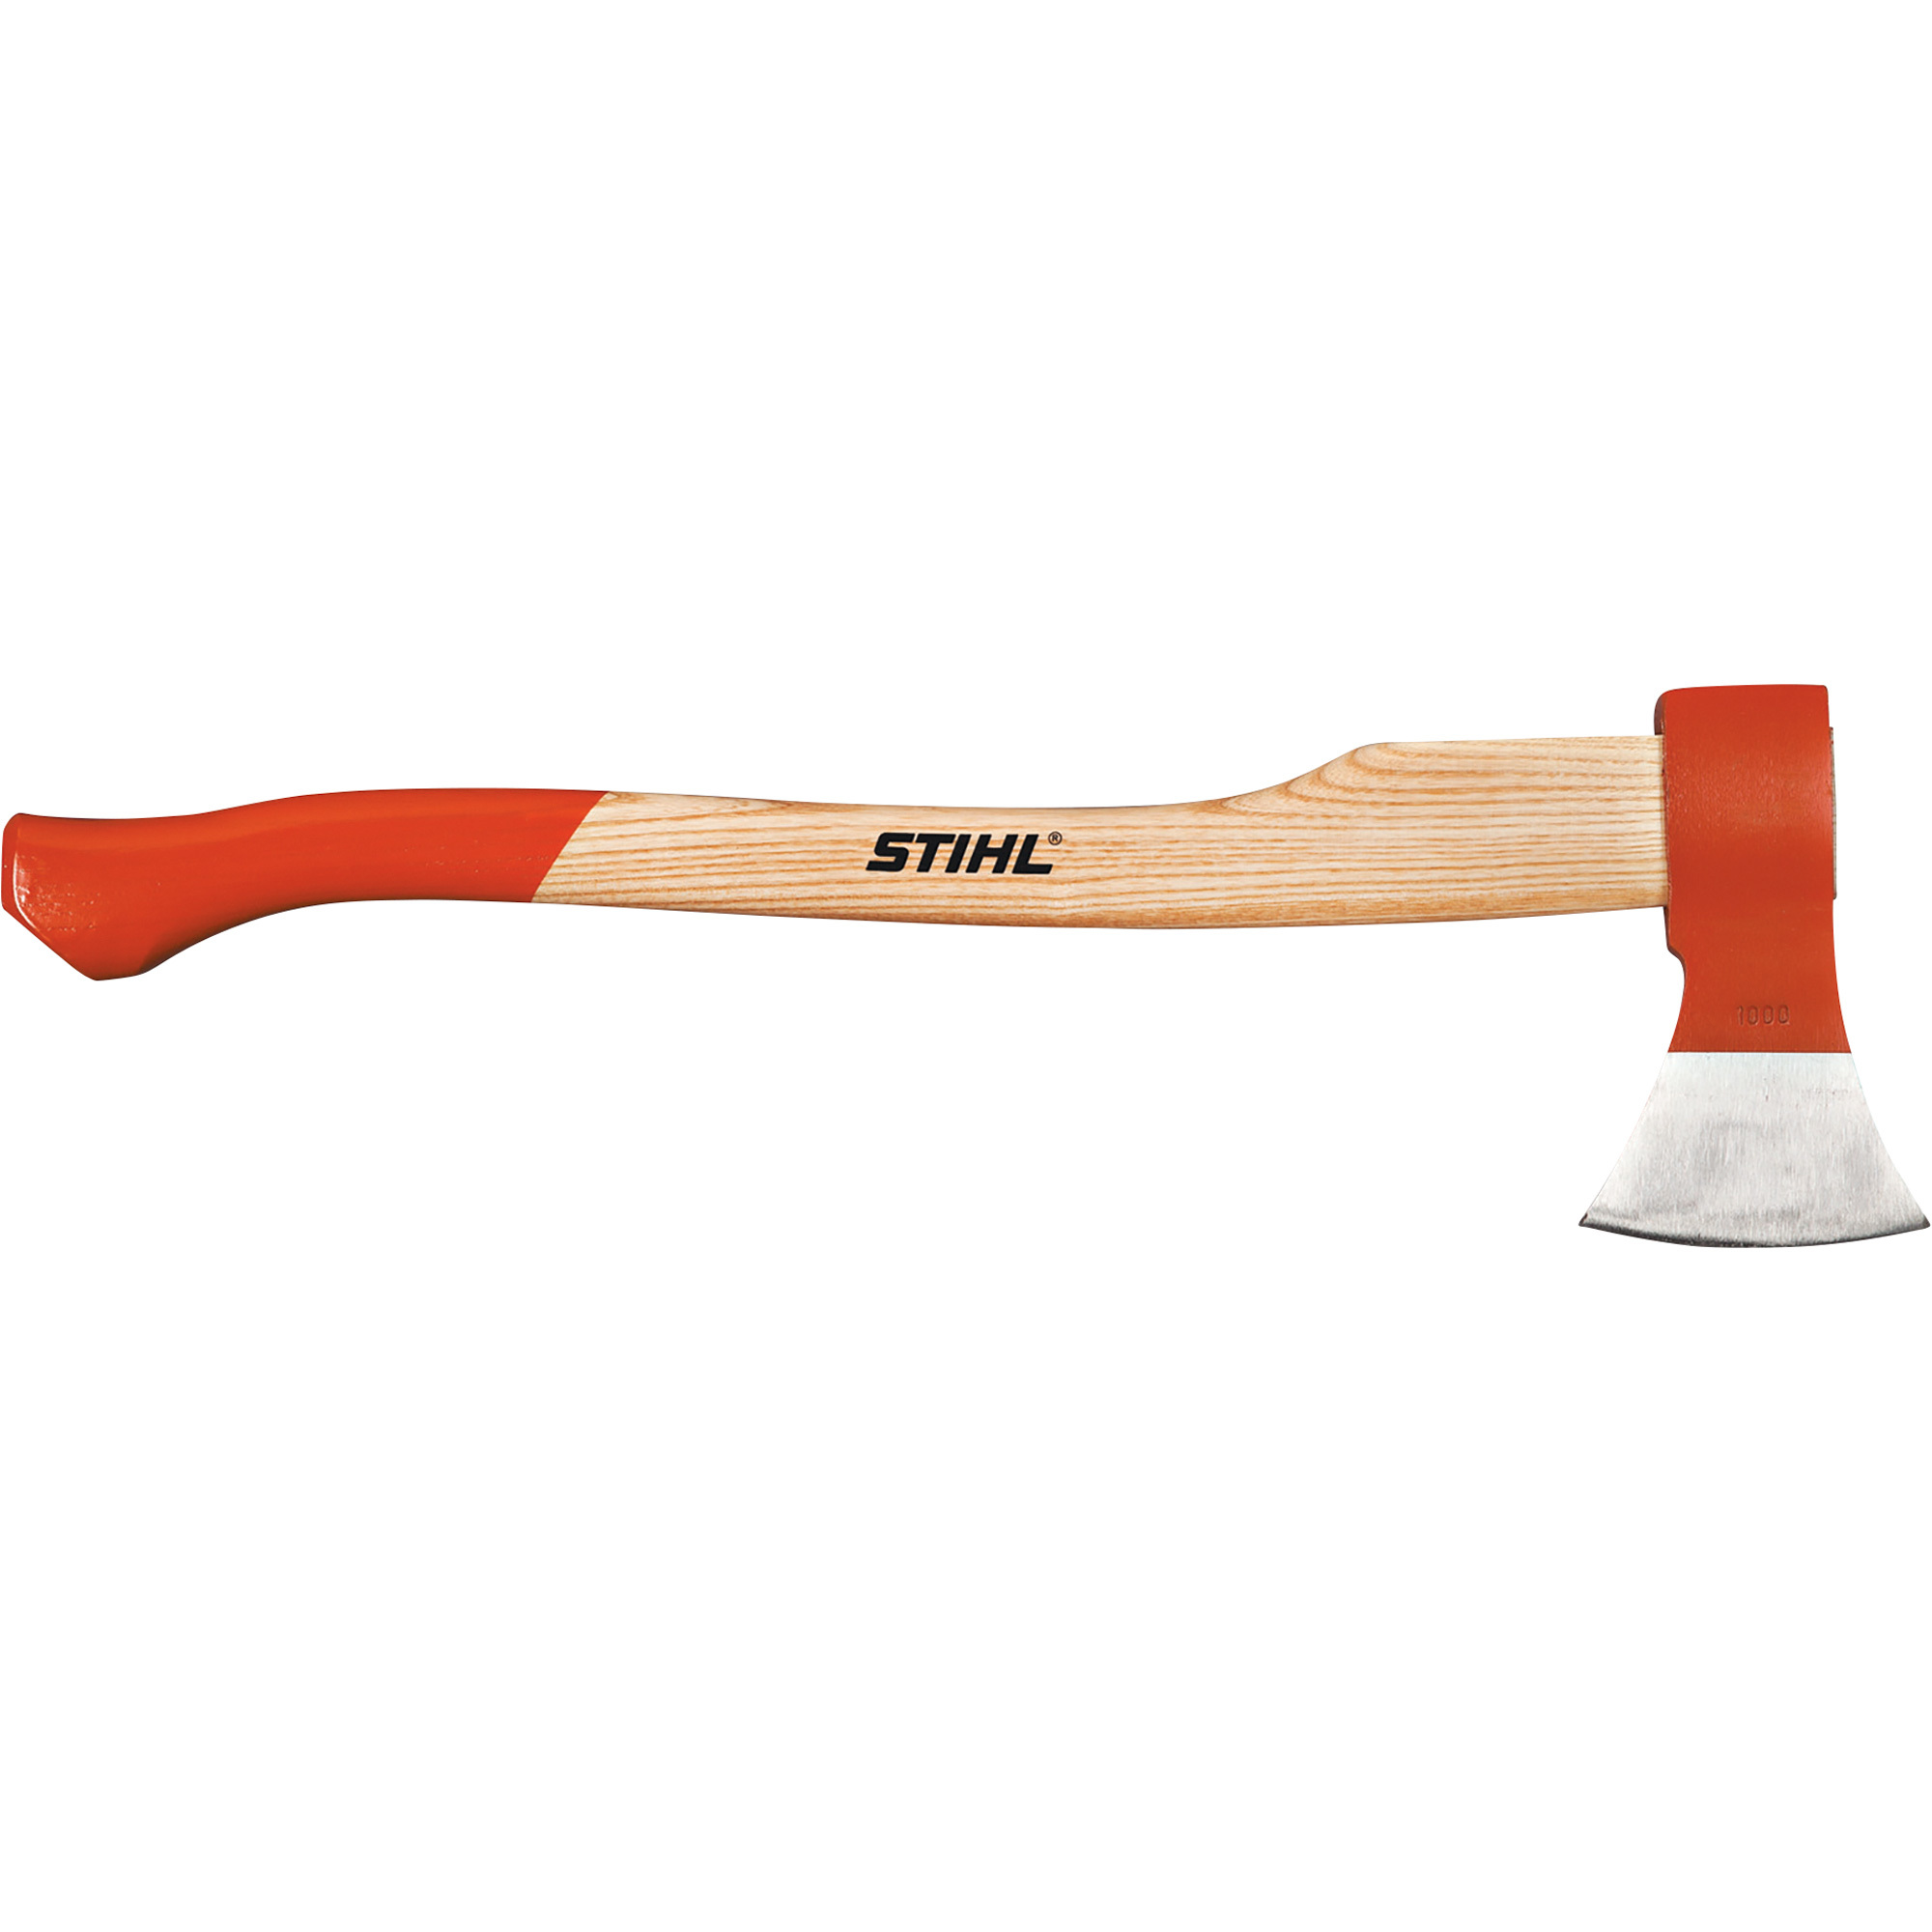 Stihl Woodcutter Universal Forestry Axe â 2.2-Lb.